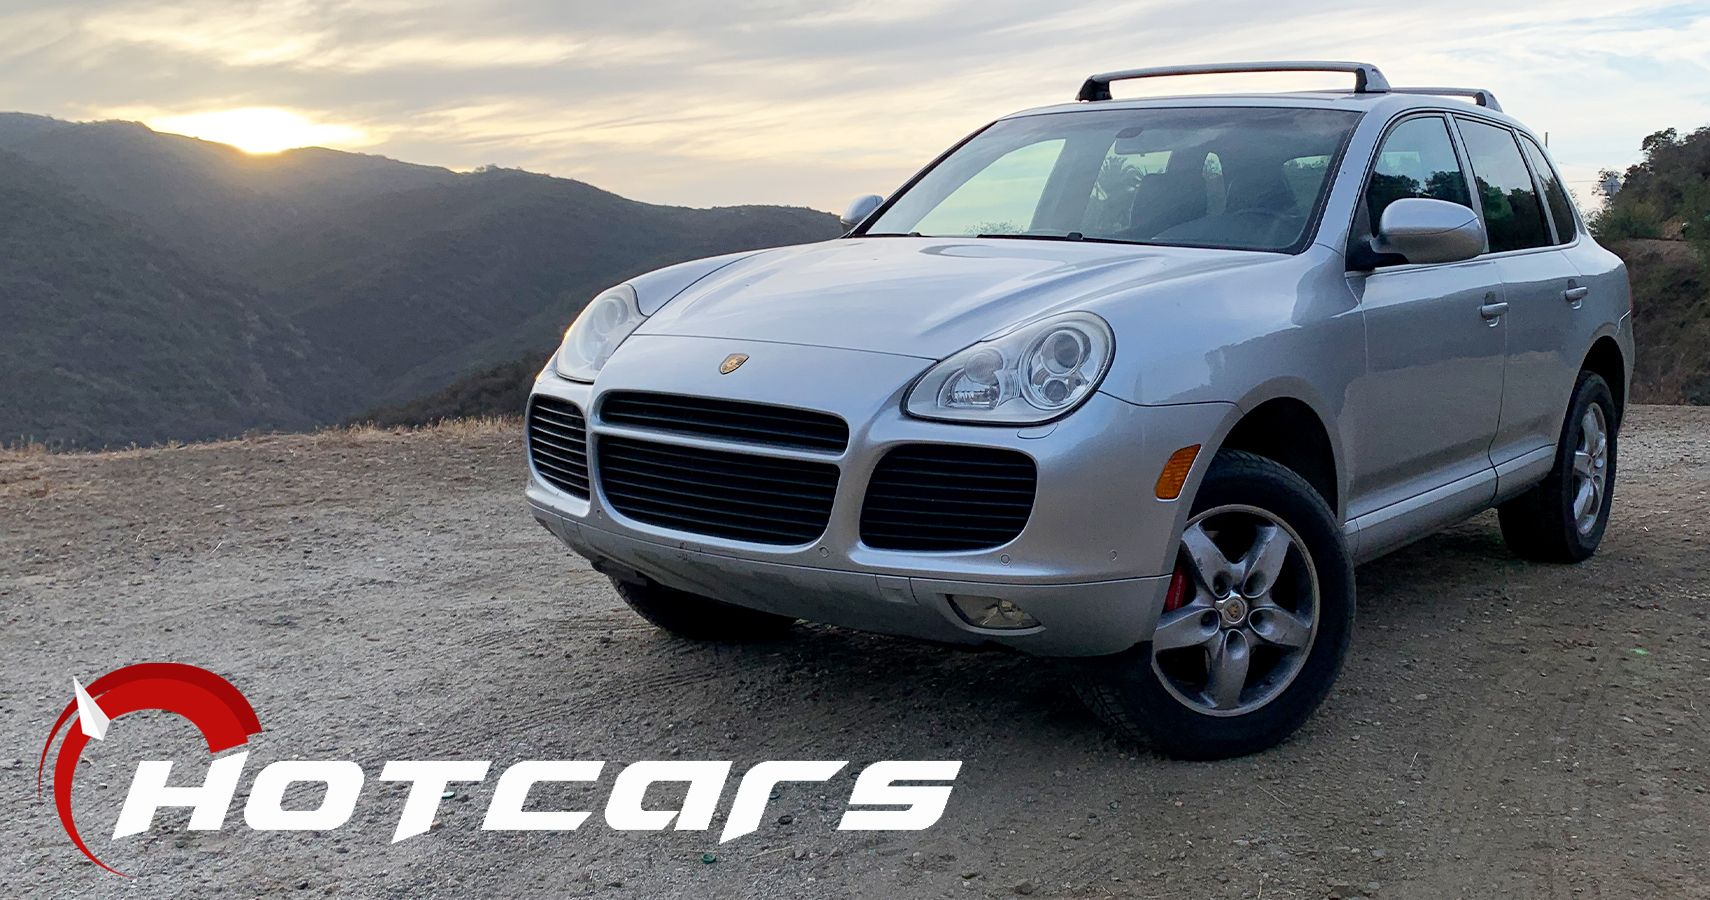 Porsche Cayenne Turbo Review A 100 000 Super Suv From 06 Still Strong Today